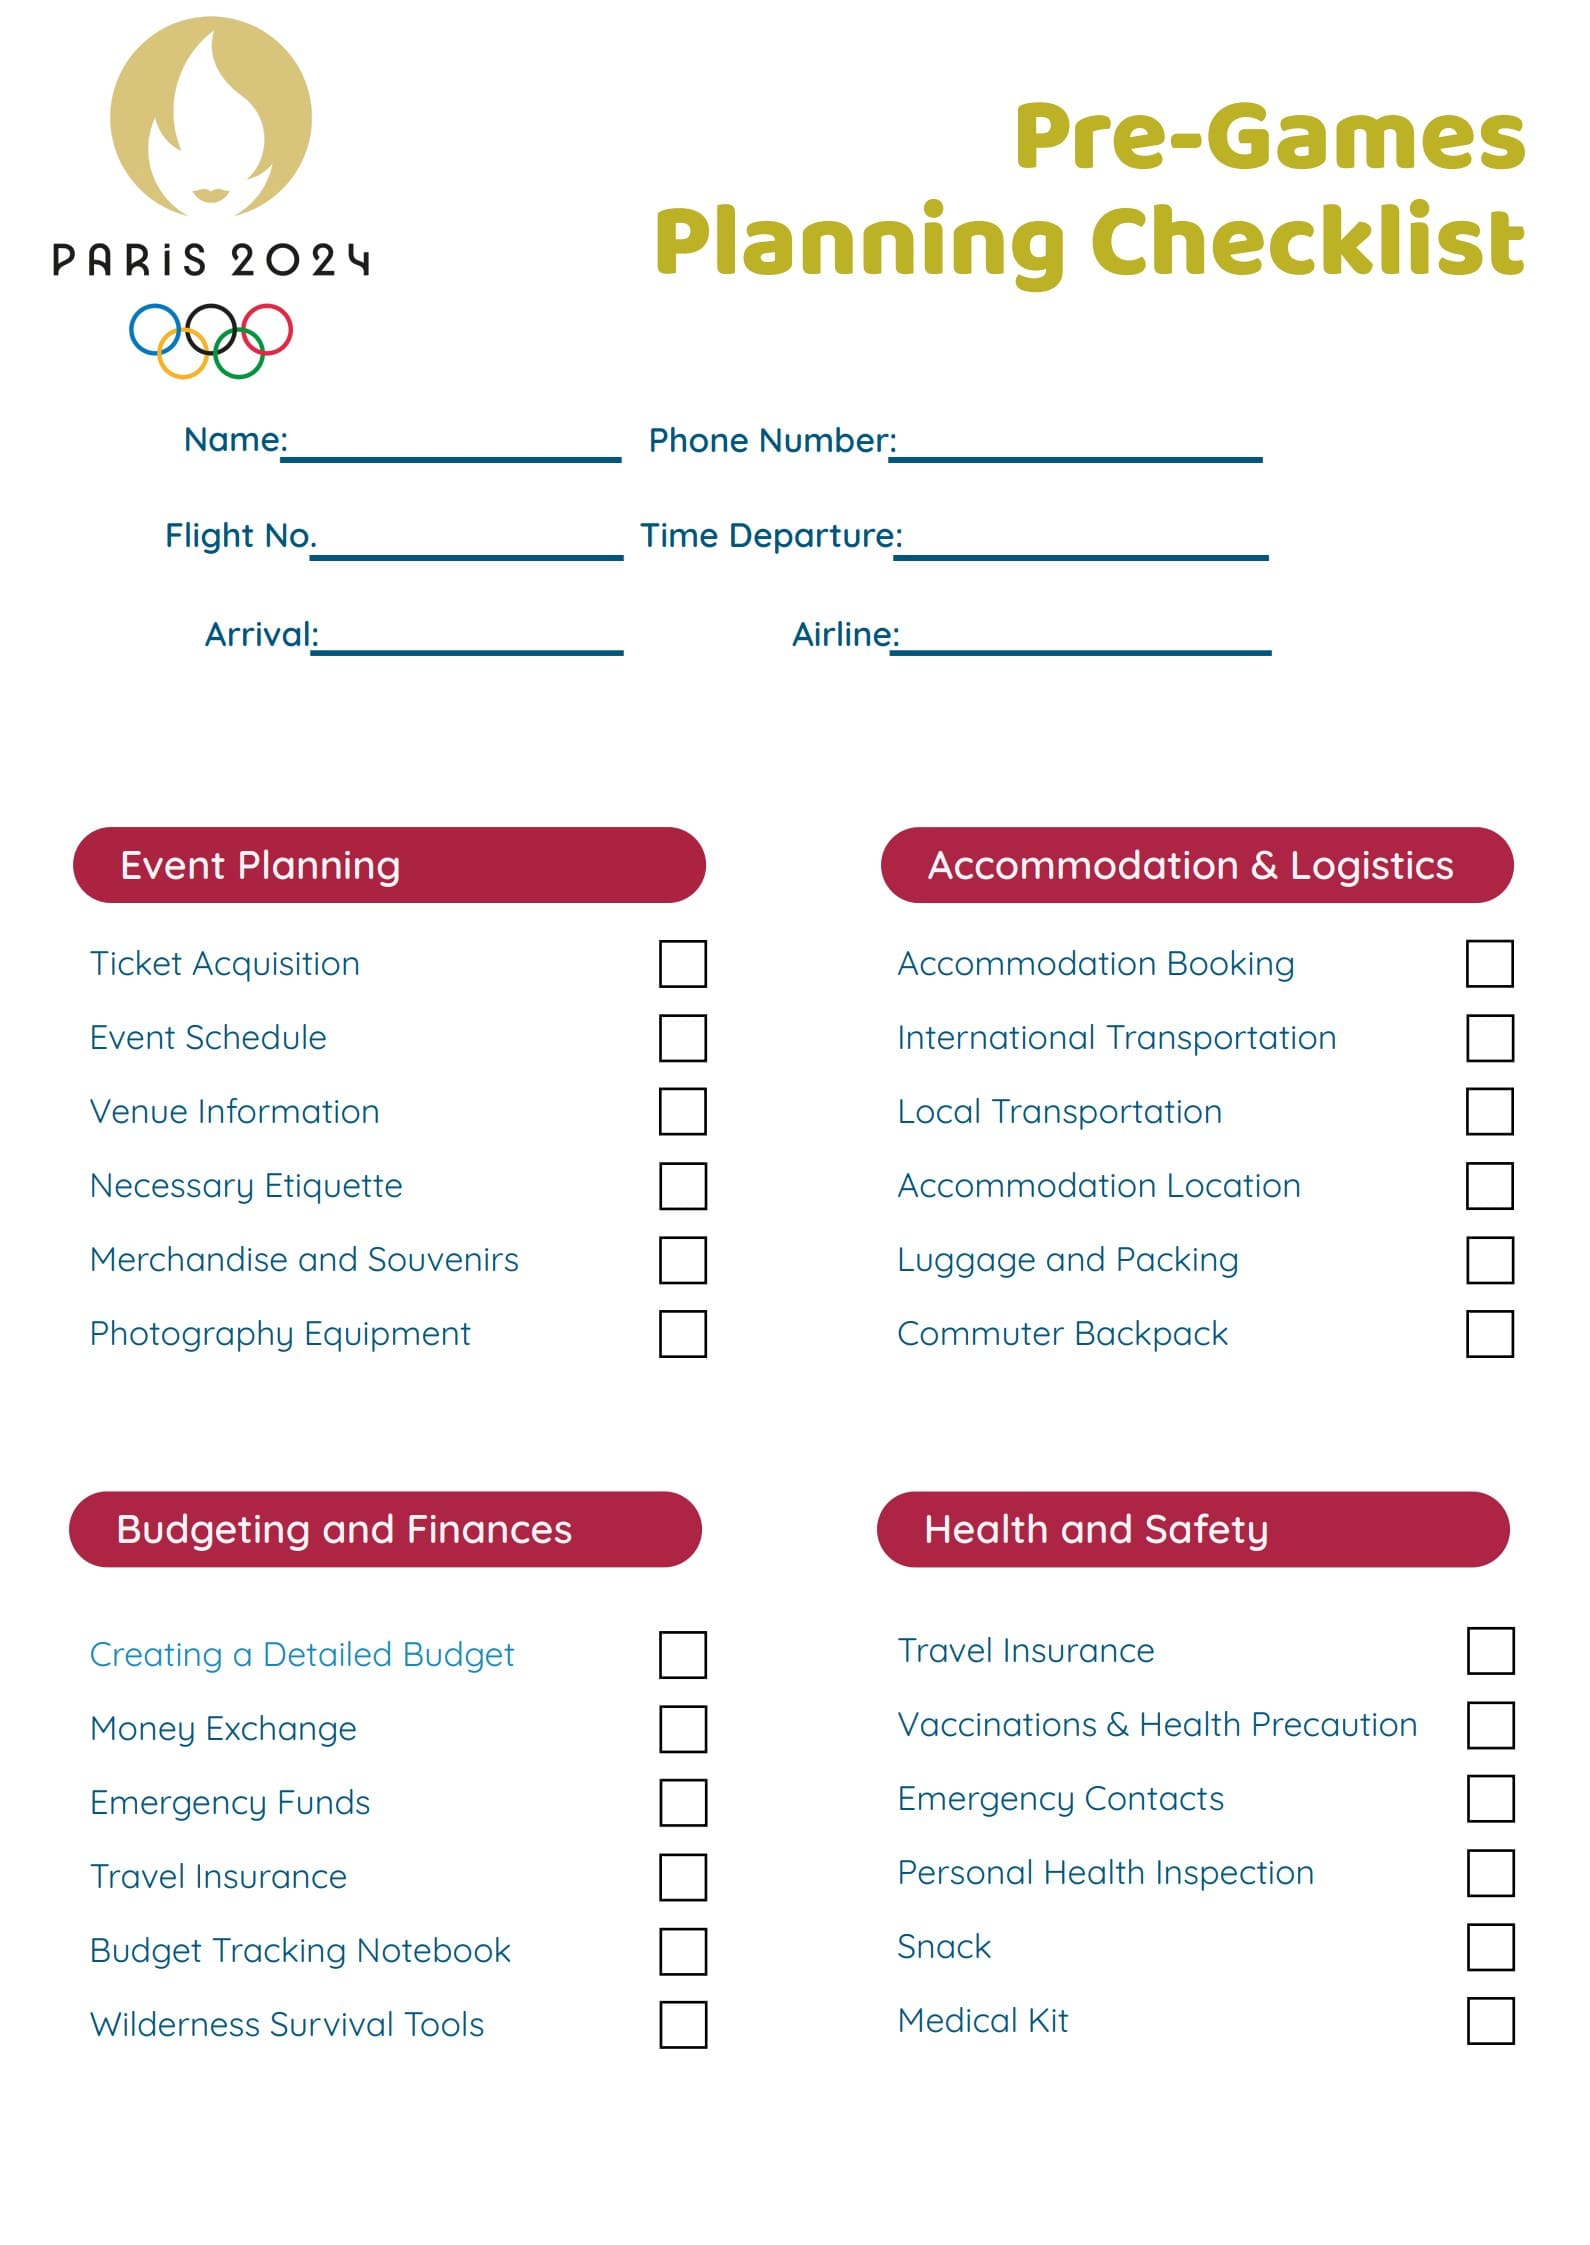 pre-games planning checklist for paris 2024 olympics